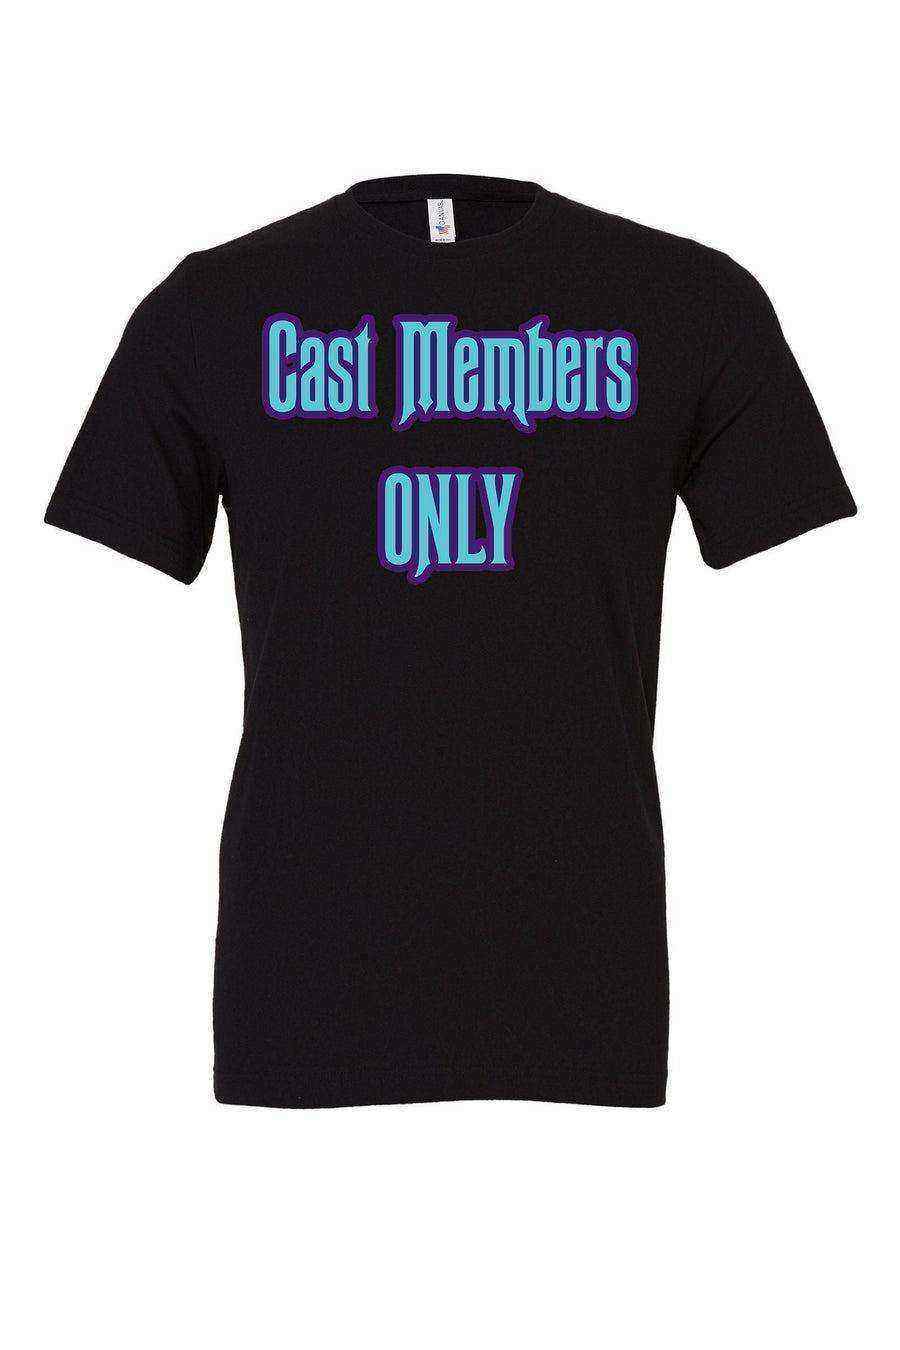 Cast Members Only Haunted Mansion Shirt | Hitchhiking Ghosts Shirt - Dylan's Tees